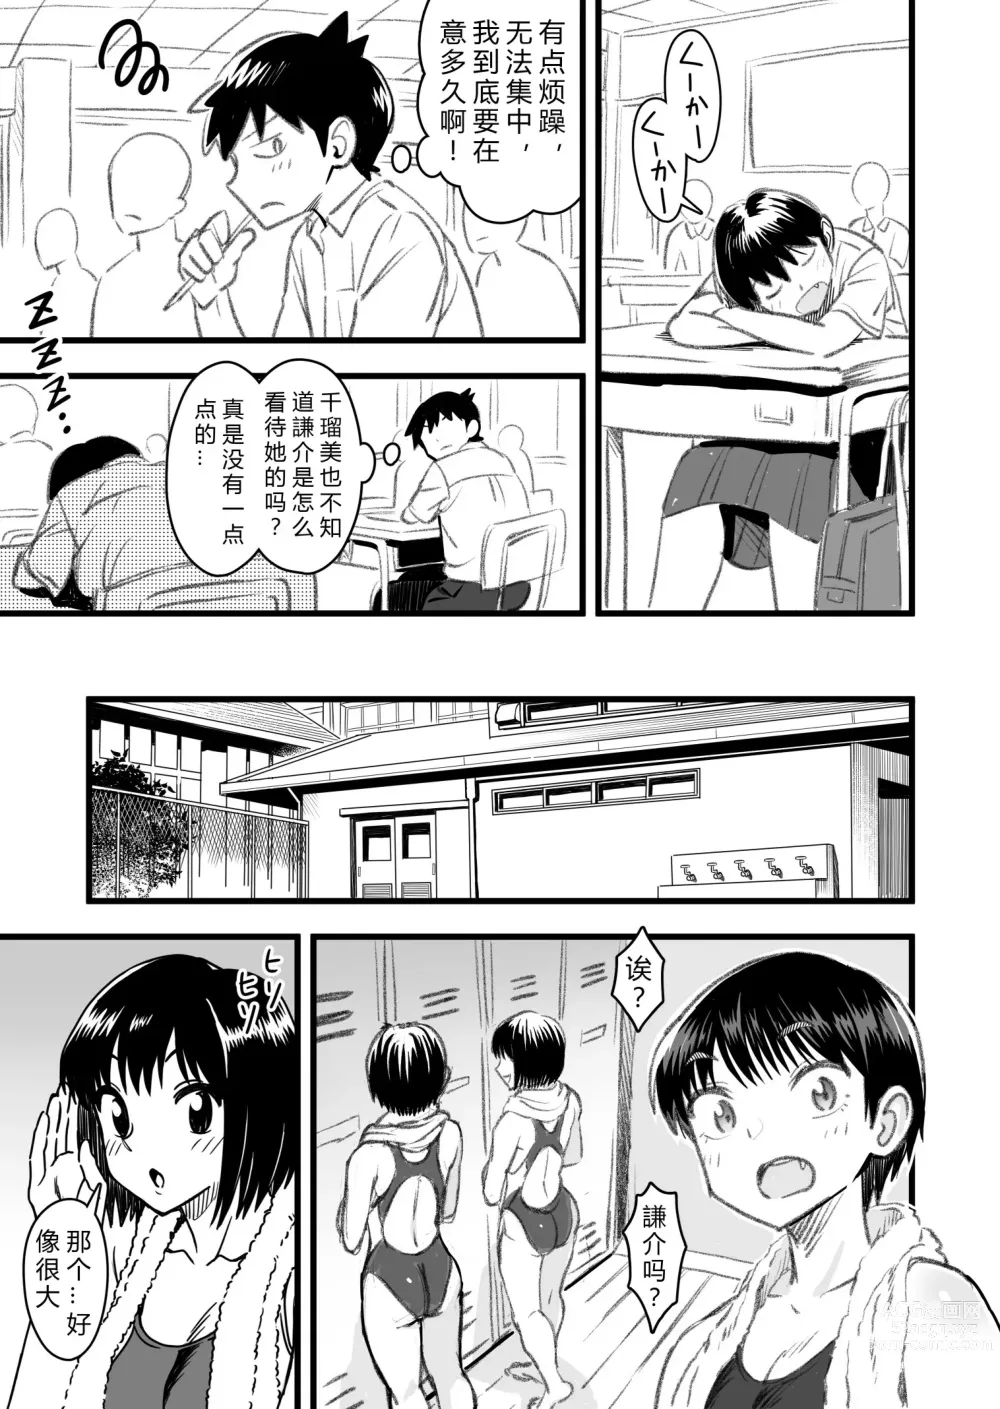 Page 21 of doujinshi How will the Protagonist's Brain be destroyed?